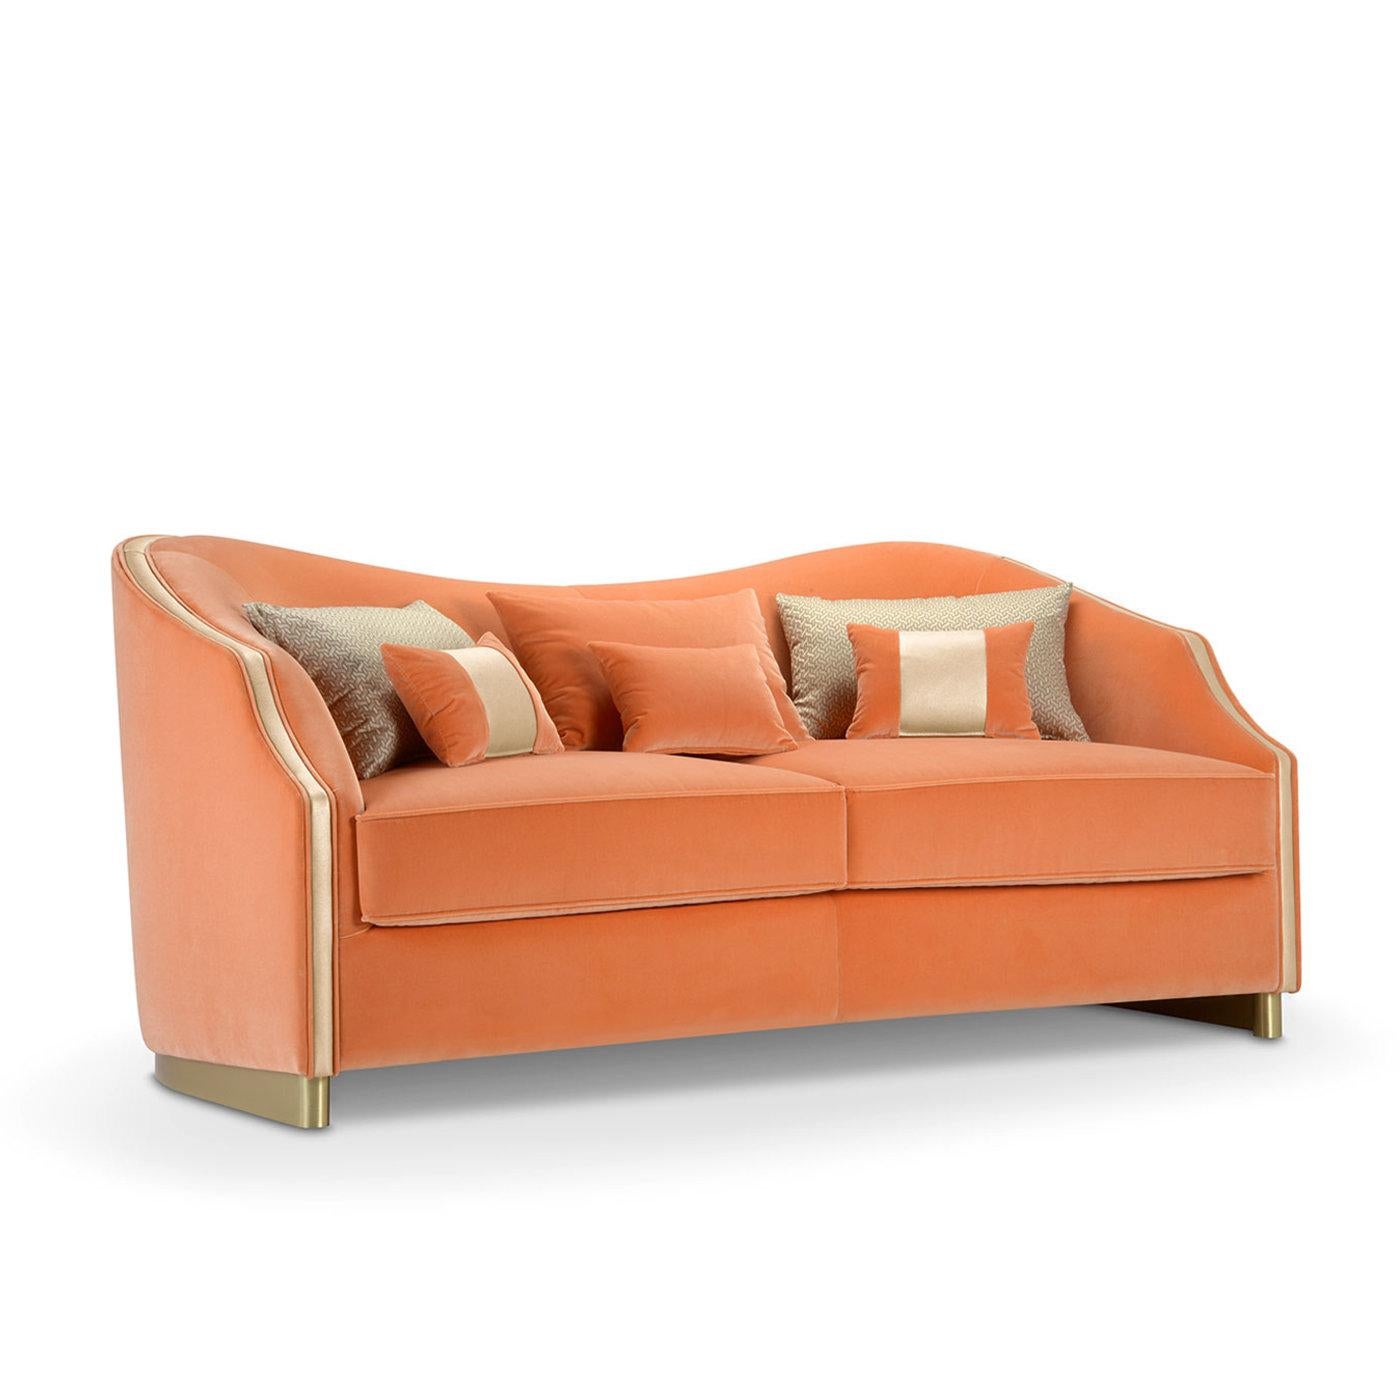 Sinuous and sophisitcated lines trace the profile of this handcrafted sofa, which is dedicated to Cleio, the Greek muse patron of history. The wavy backrest hiding a smooth shell curves and slopes at the sides to form comfortable armrests, while a